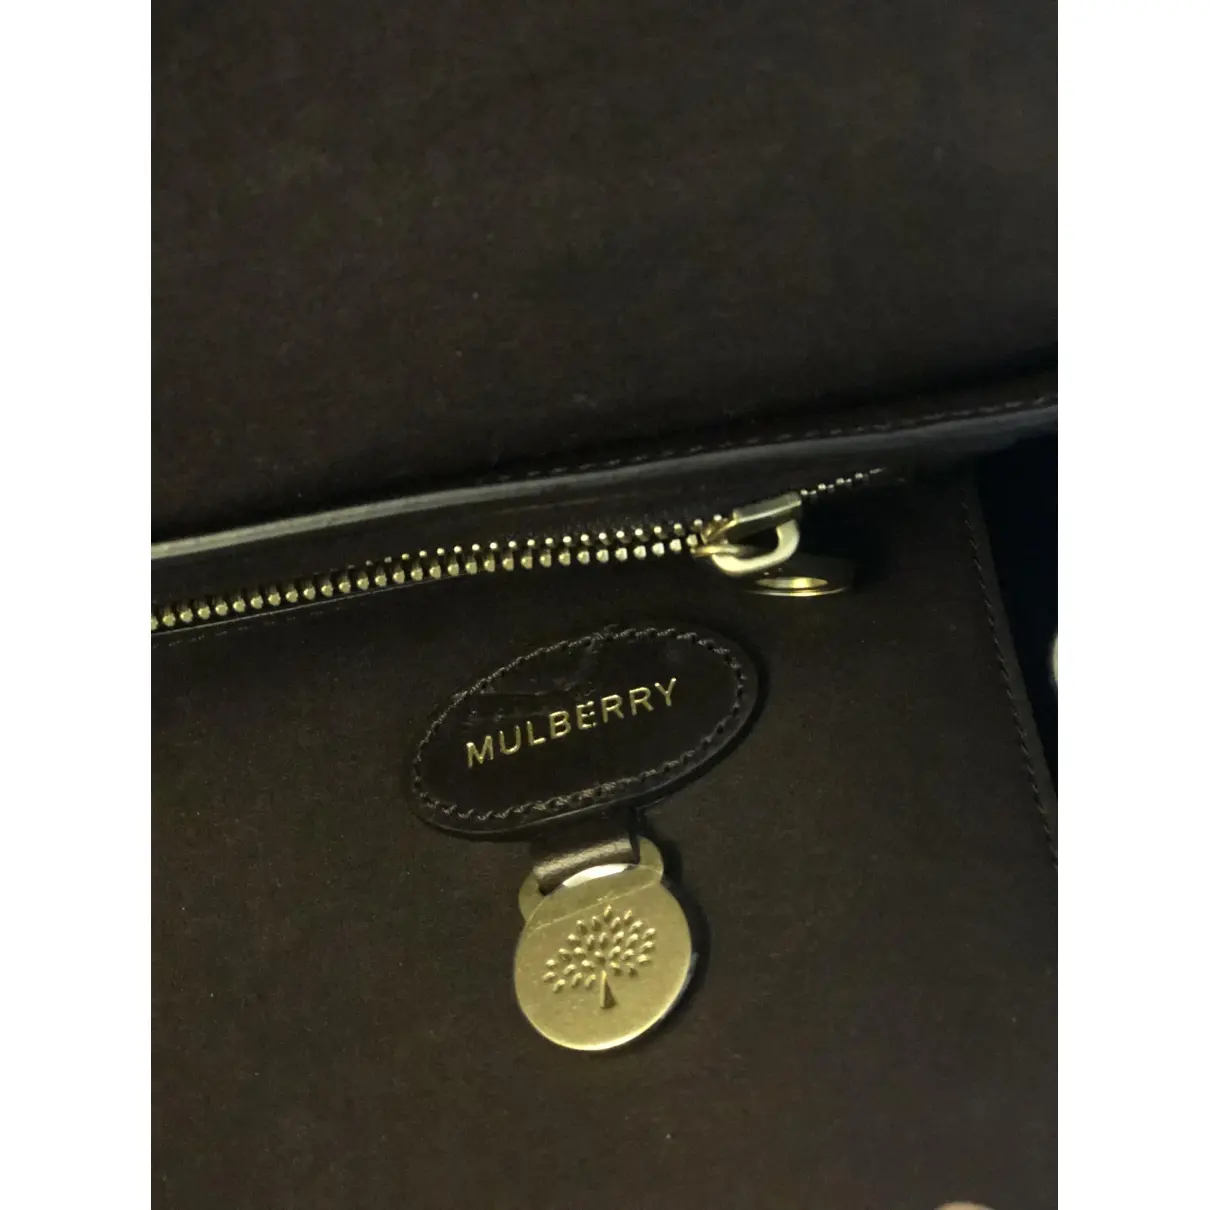 Buy Mulberry Bayswater leather tote online